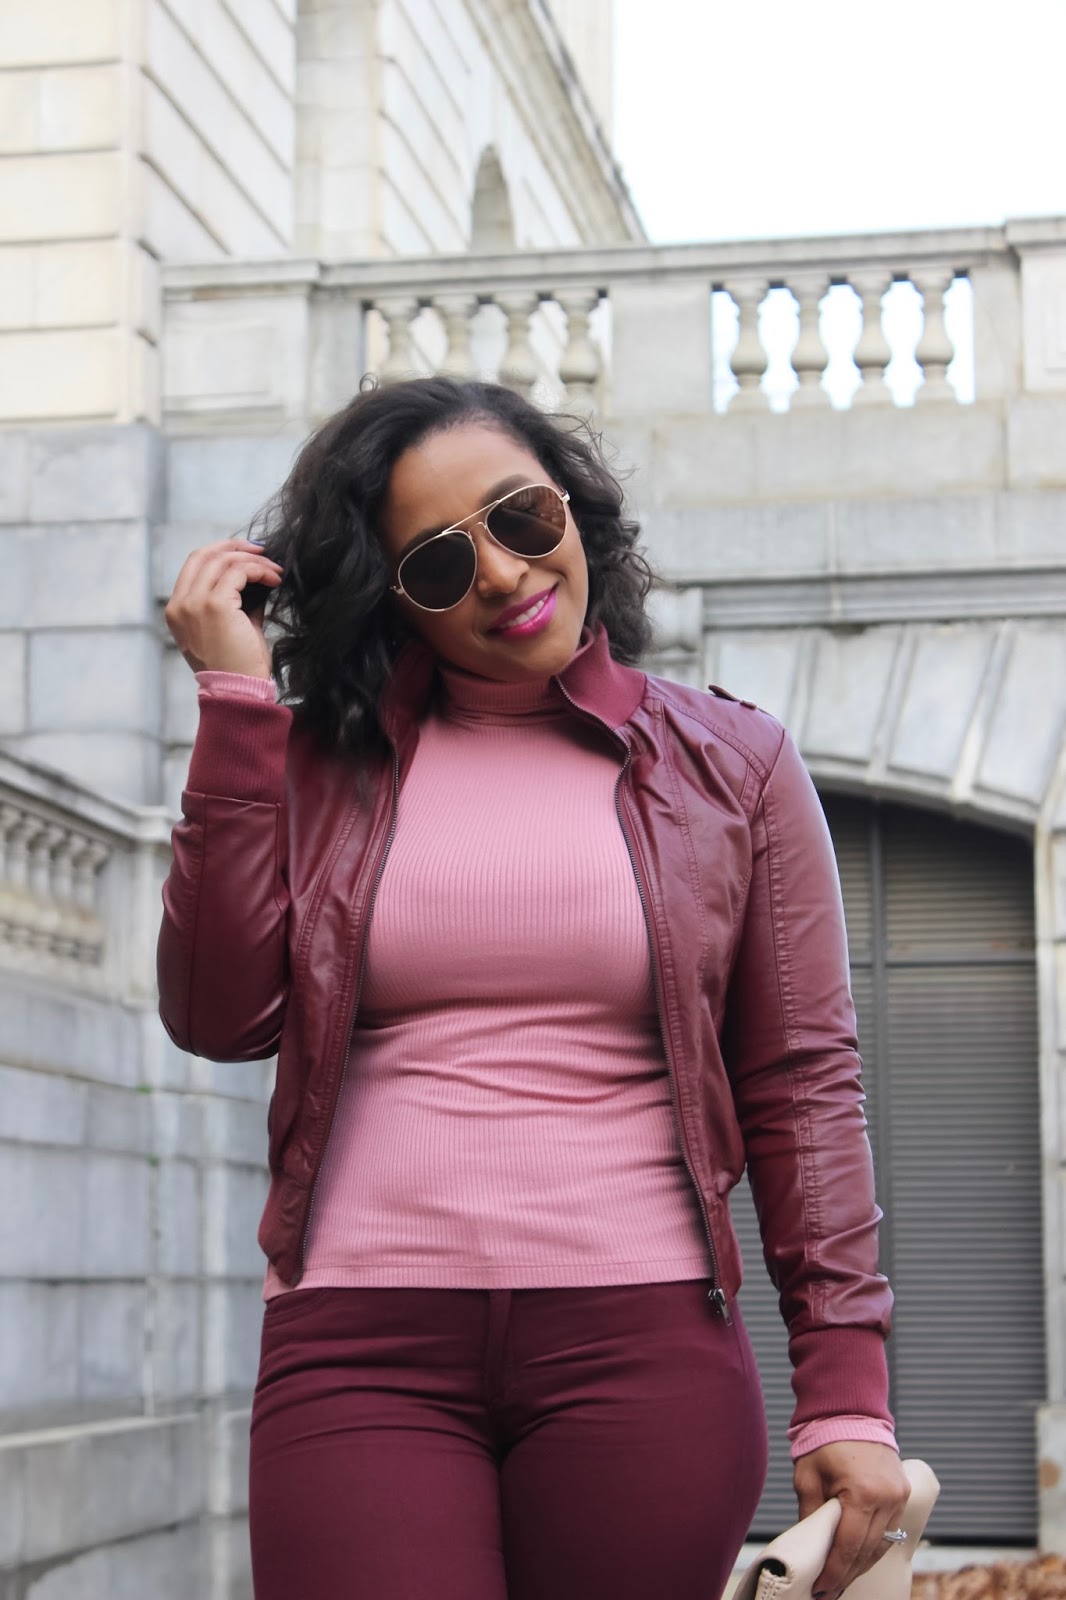 monochrome, pink outfit, the monochrome trend, how to wear monochrome, monochrome outfits